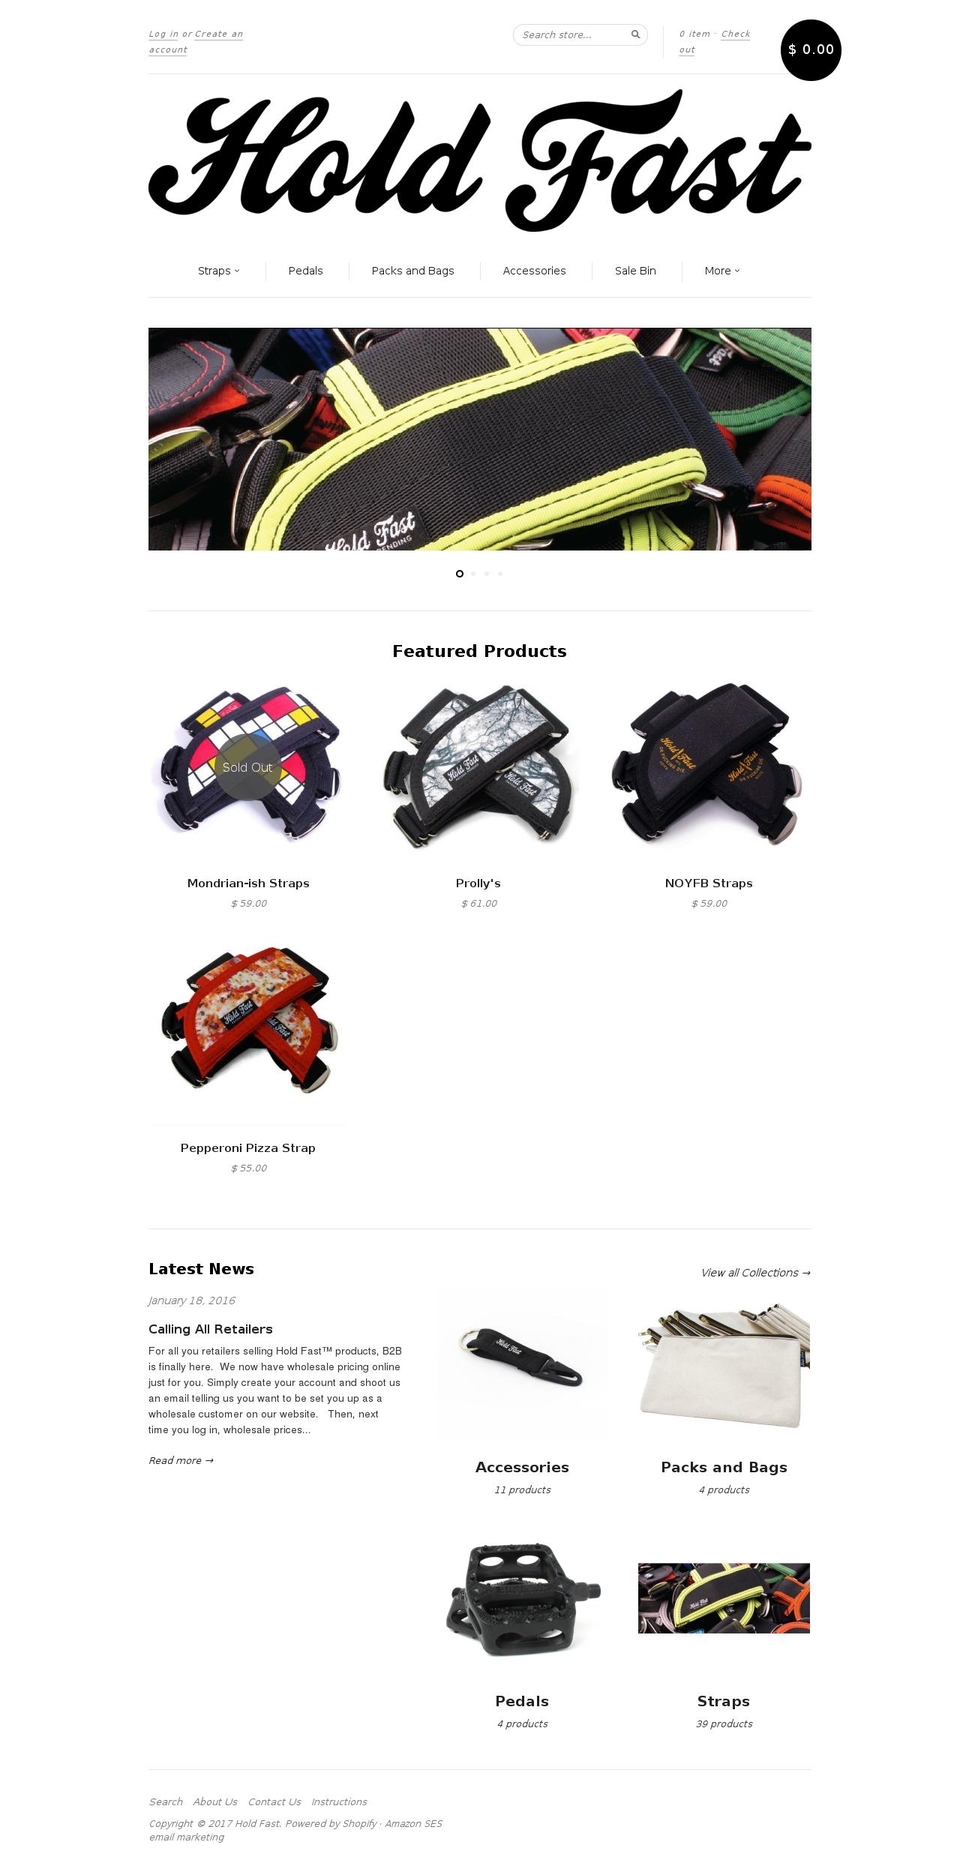 Responsive Shopify theme site example holdfastordie.com